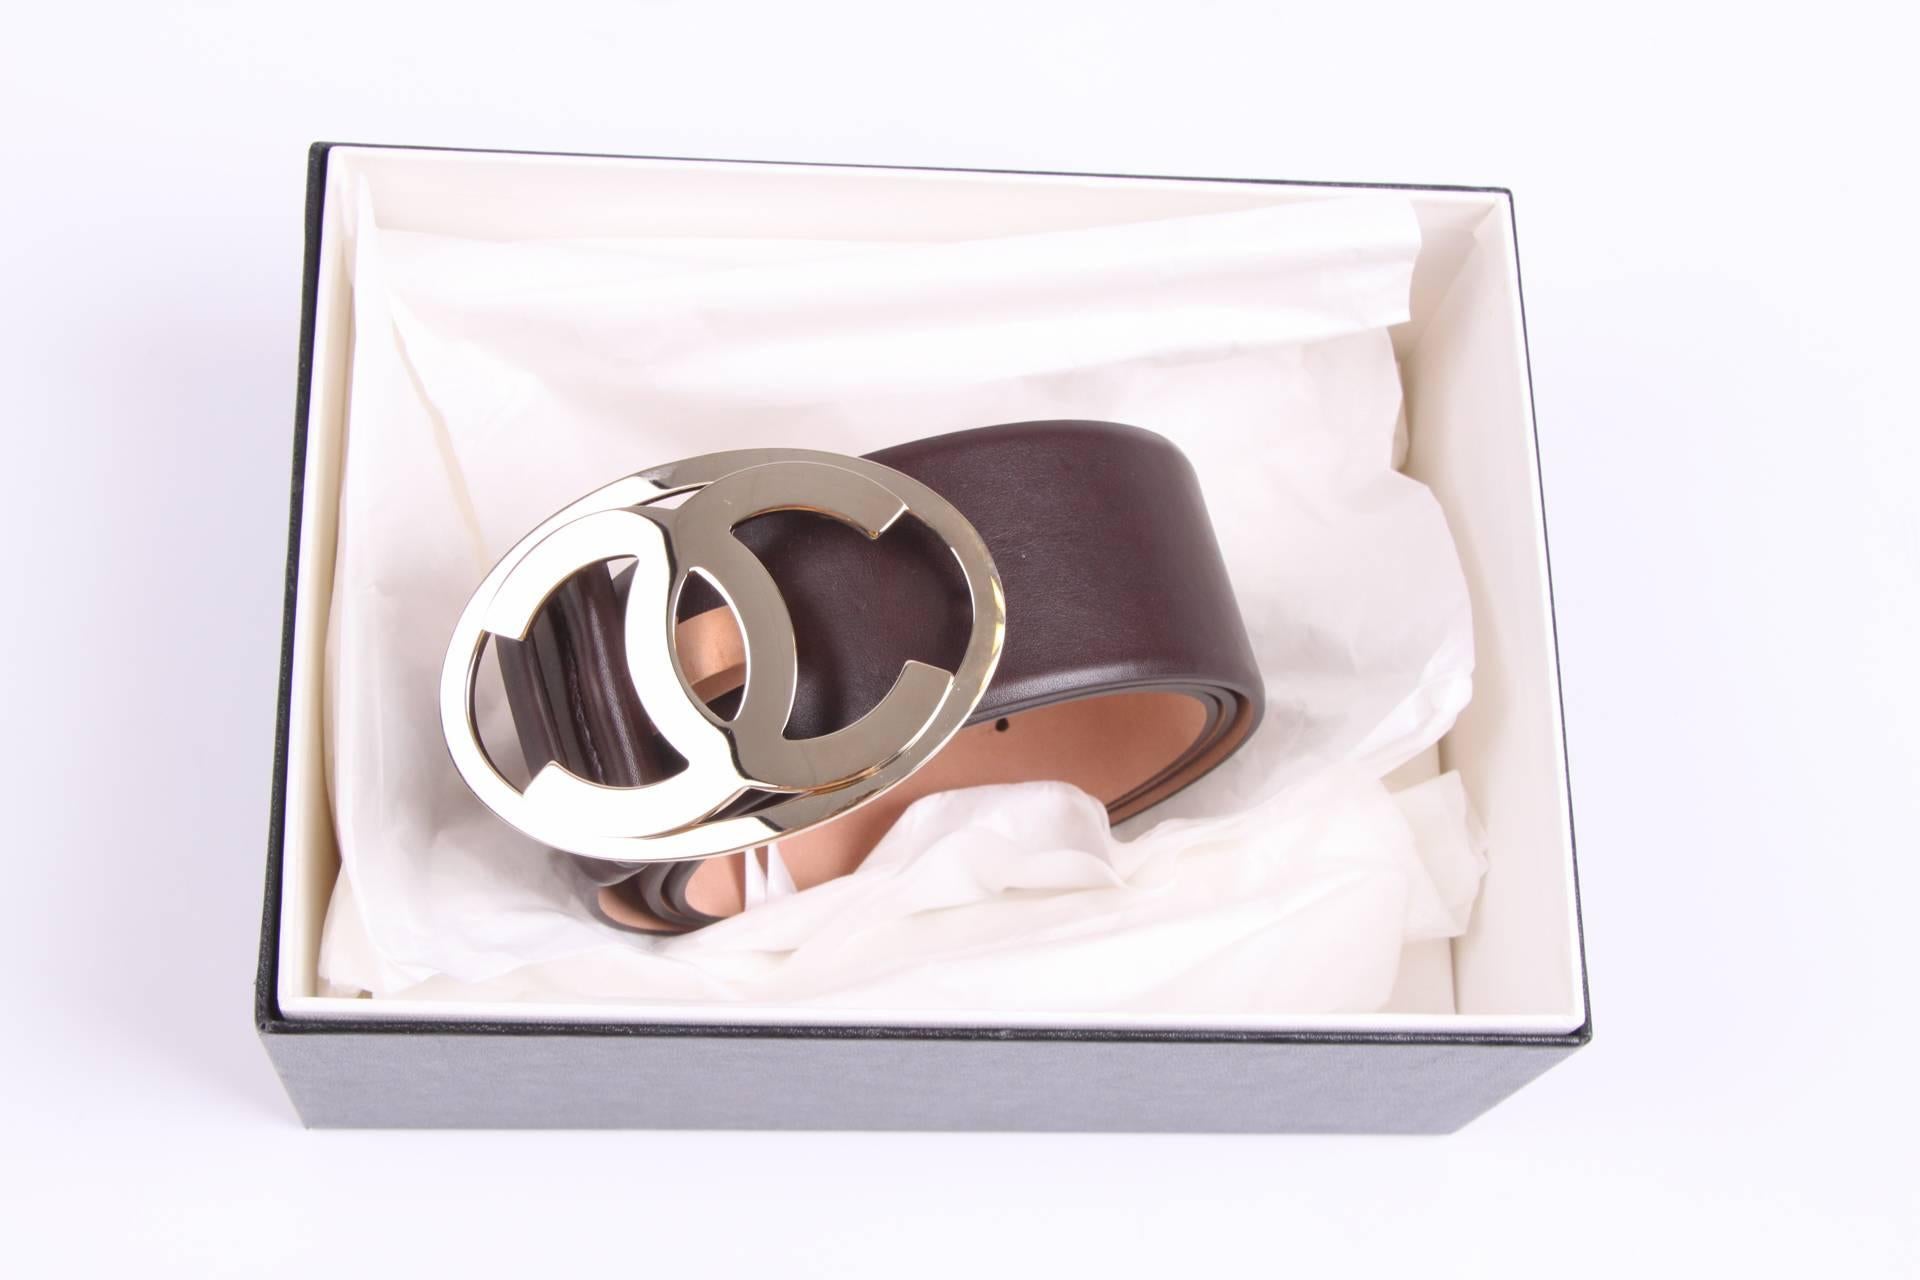 Stylish dark brown belt by Chanel with a silver-tone CC buckle.

This belt is 5 centimeters wide and is fully made of brown calfskin leather, the inside of the belt is nude coloured. The large shiny buckle measures as much as 10 x 6,5 centimters. A